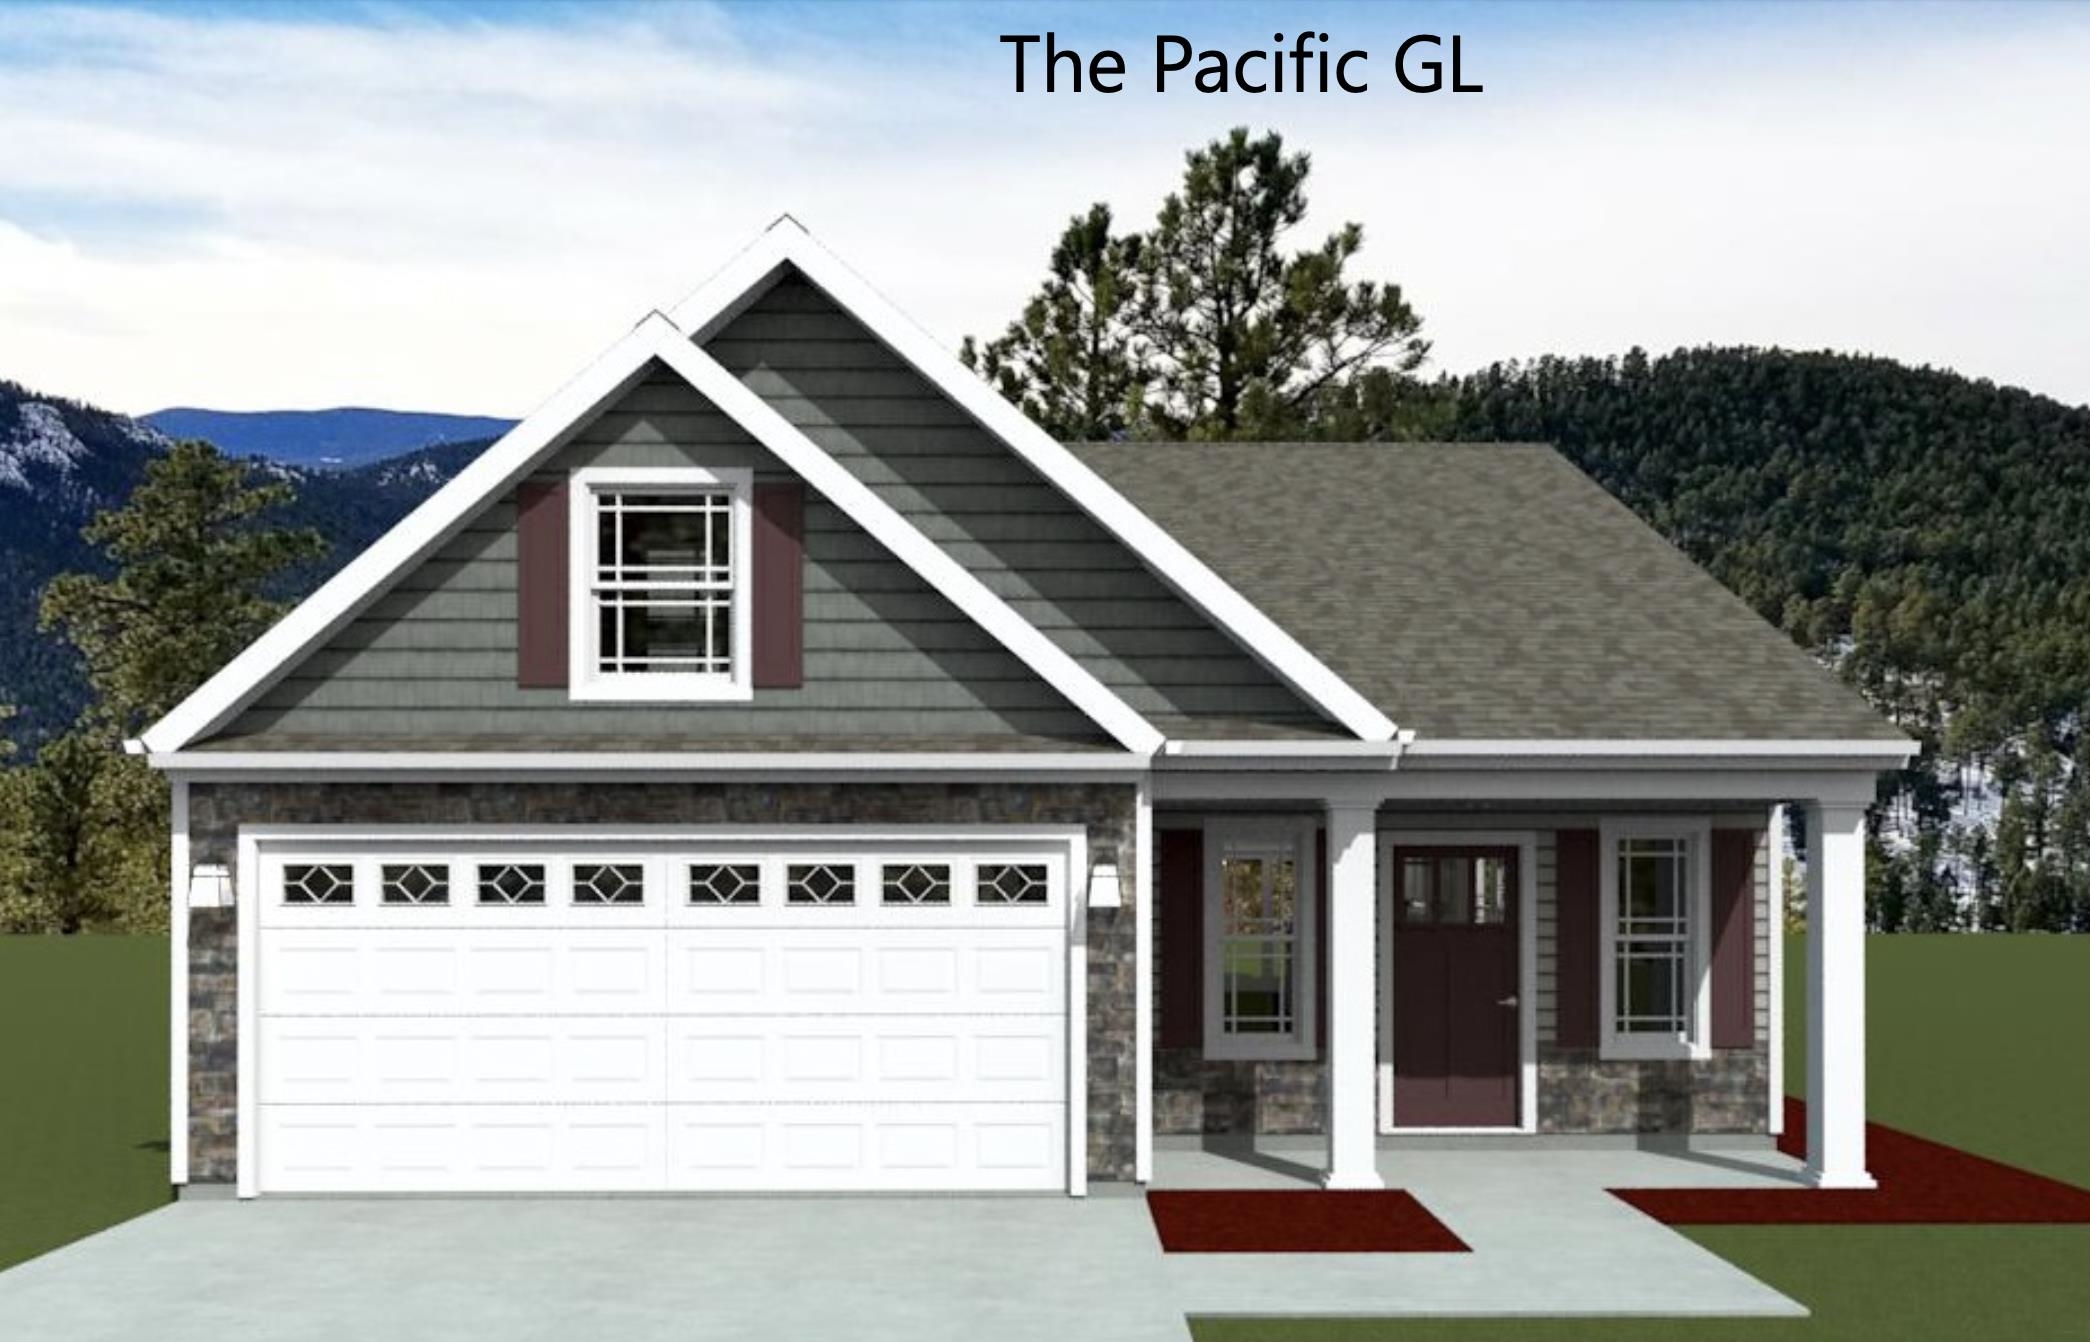 The PACIFIC (Lot 2) offers a modern, open concept living area perfect for entertaining.  3 bedroom, 2 bath. Complete with the trademark chair rail, crown molding, and rope lighting.  12' x 12' covered back patio.   30-year architectural shingles, site-built construction, and a 10 year limited warranty are included to give you peace of mind.  Preferred Lender/Attorney Closing Costs Incentive Offered!